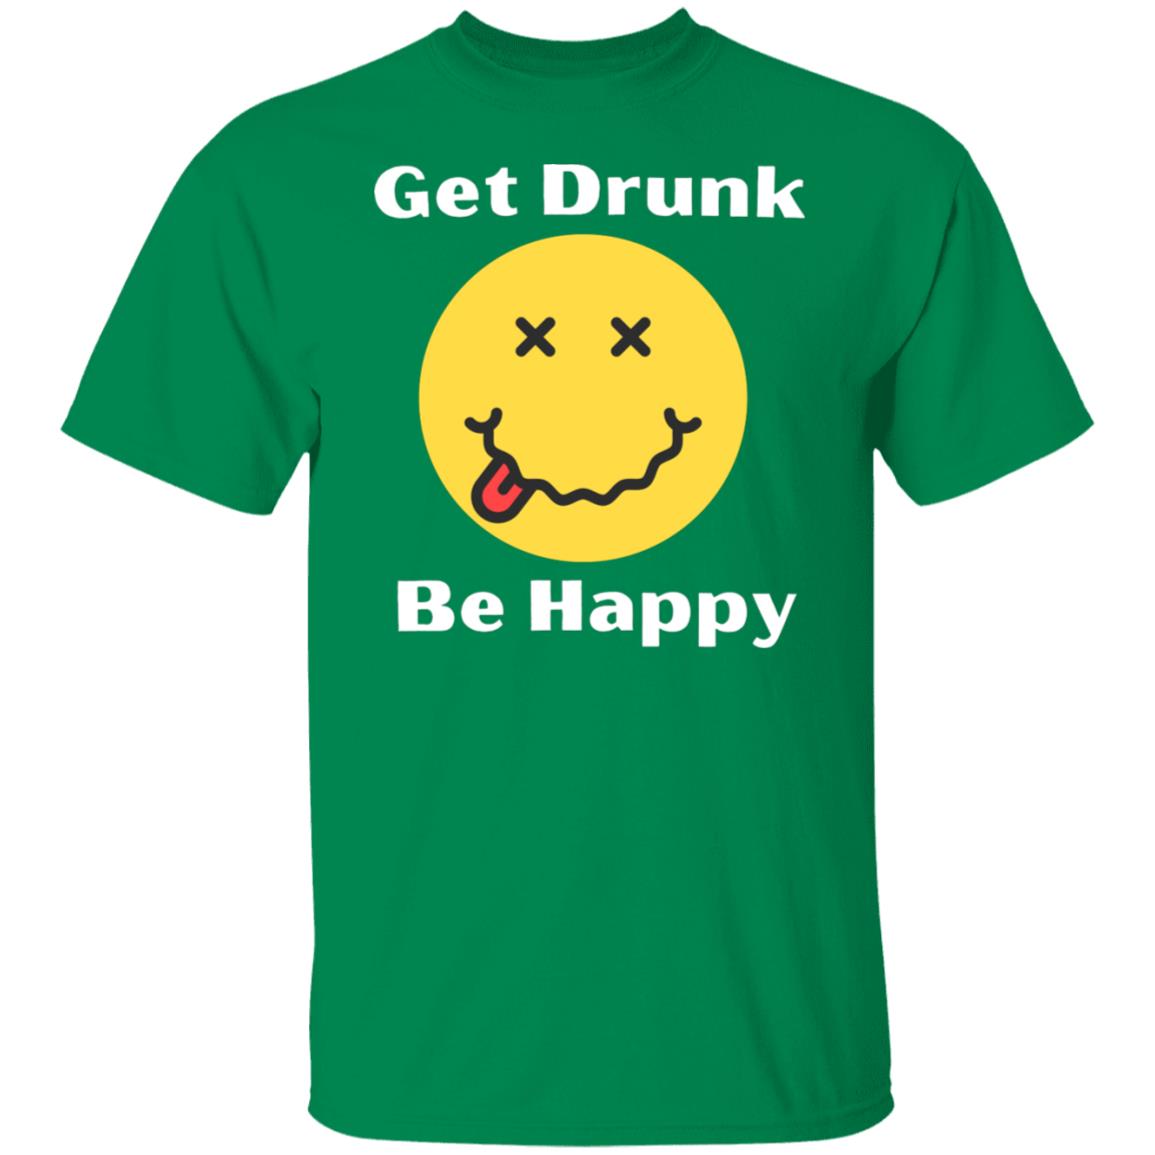 Get Drunk Be Happy Beer Lover Weekend Party Smiley Face Drunk Shirt Graphic Tee T-Shirt